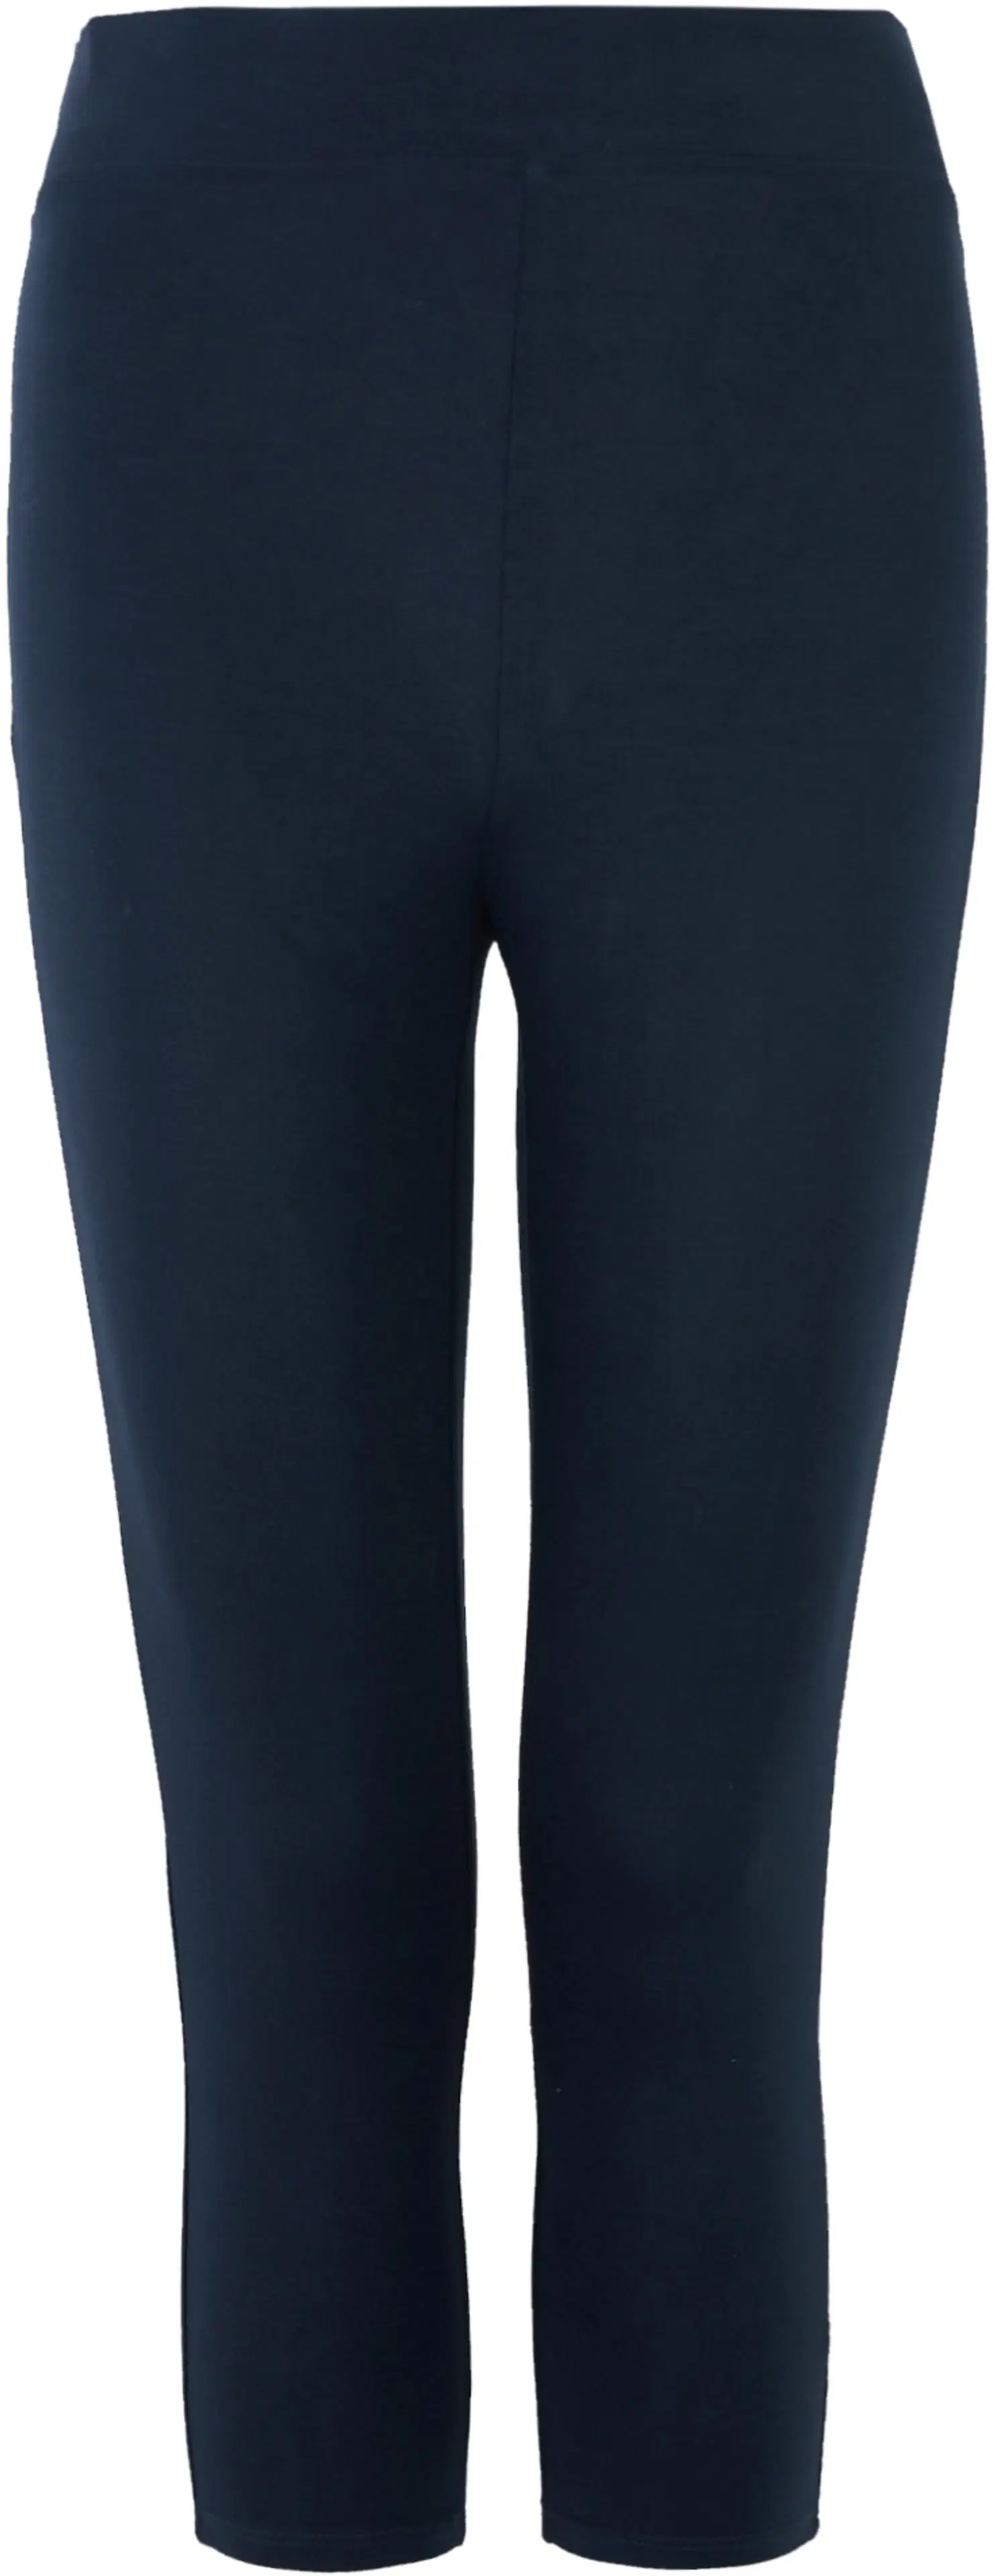 M&S High Waisted Cropped Leggings